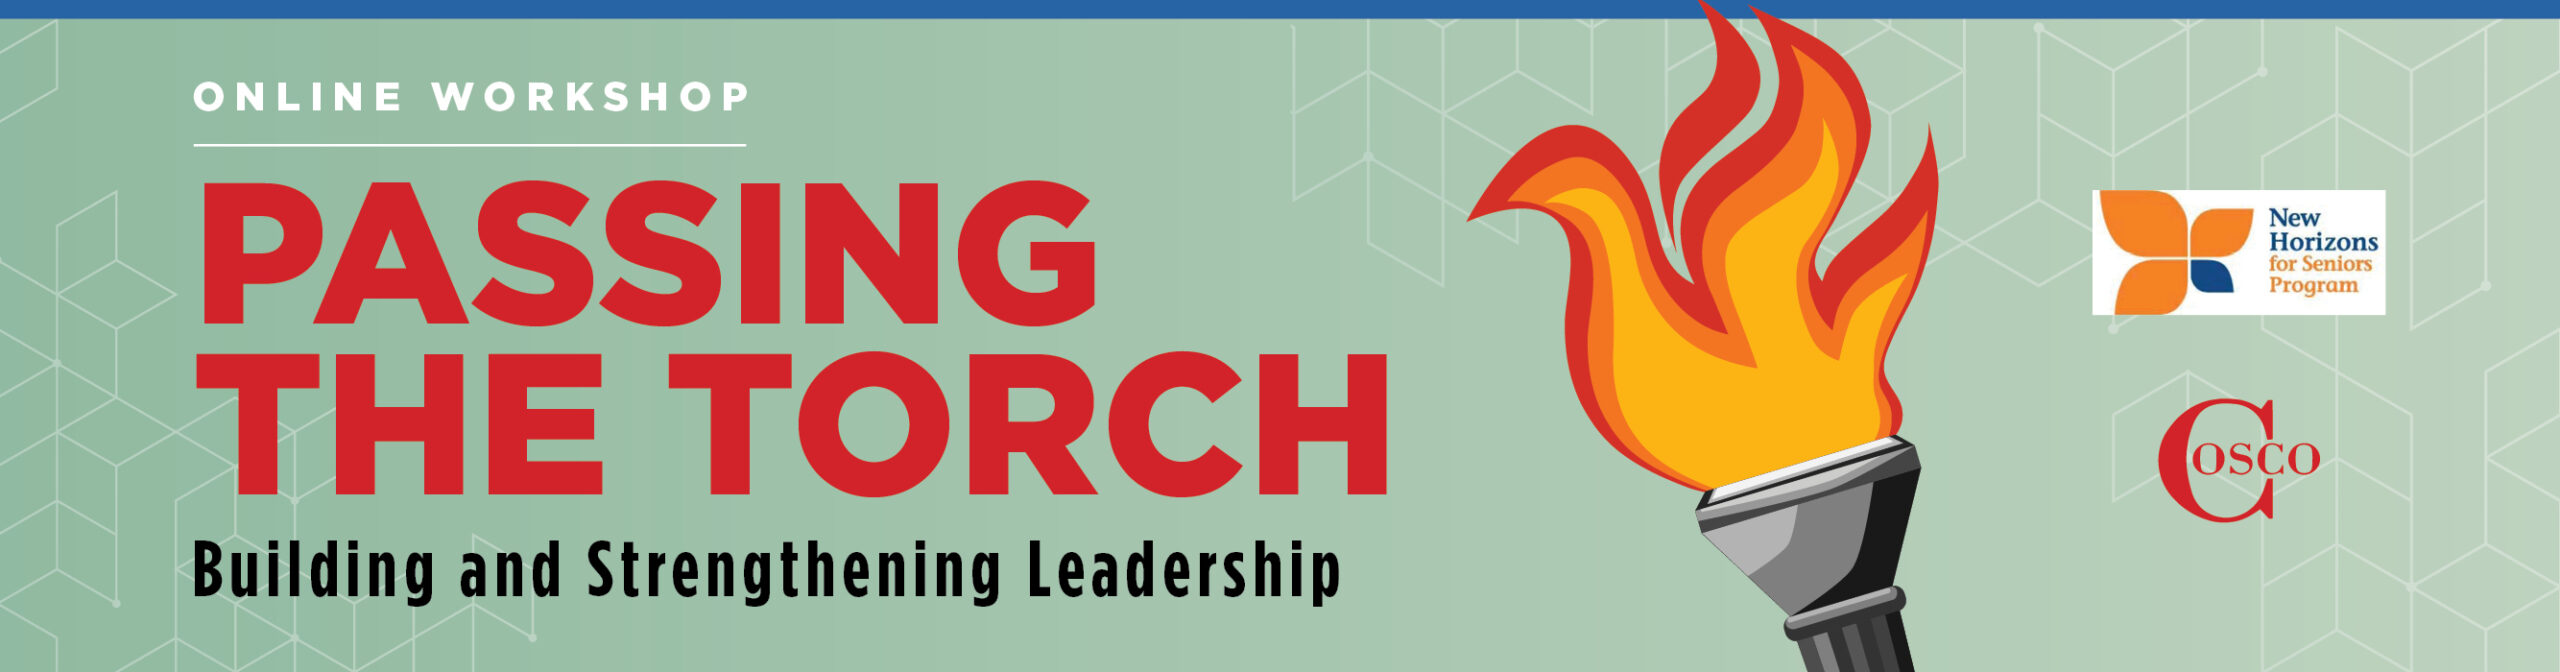 Passing The Torch – Building and Strengthening Leadership Online Workshop